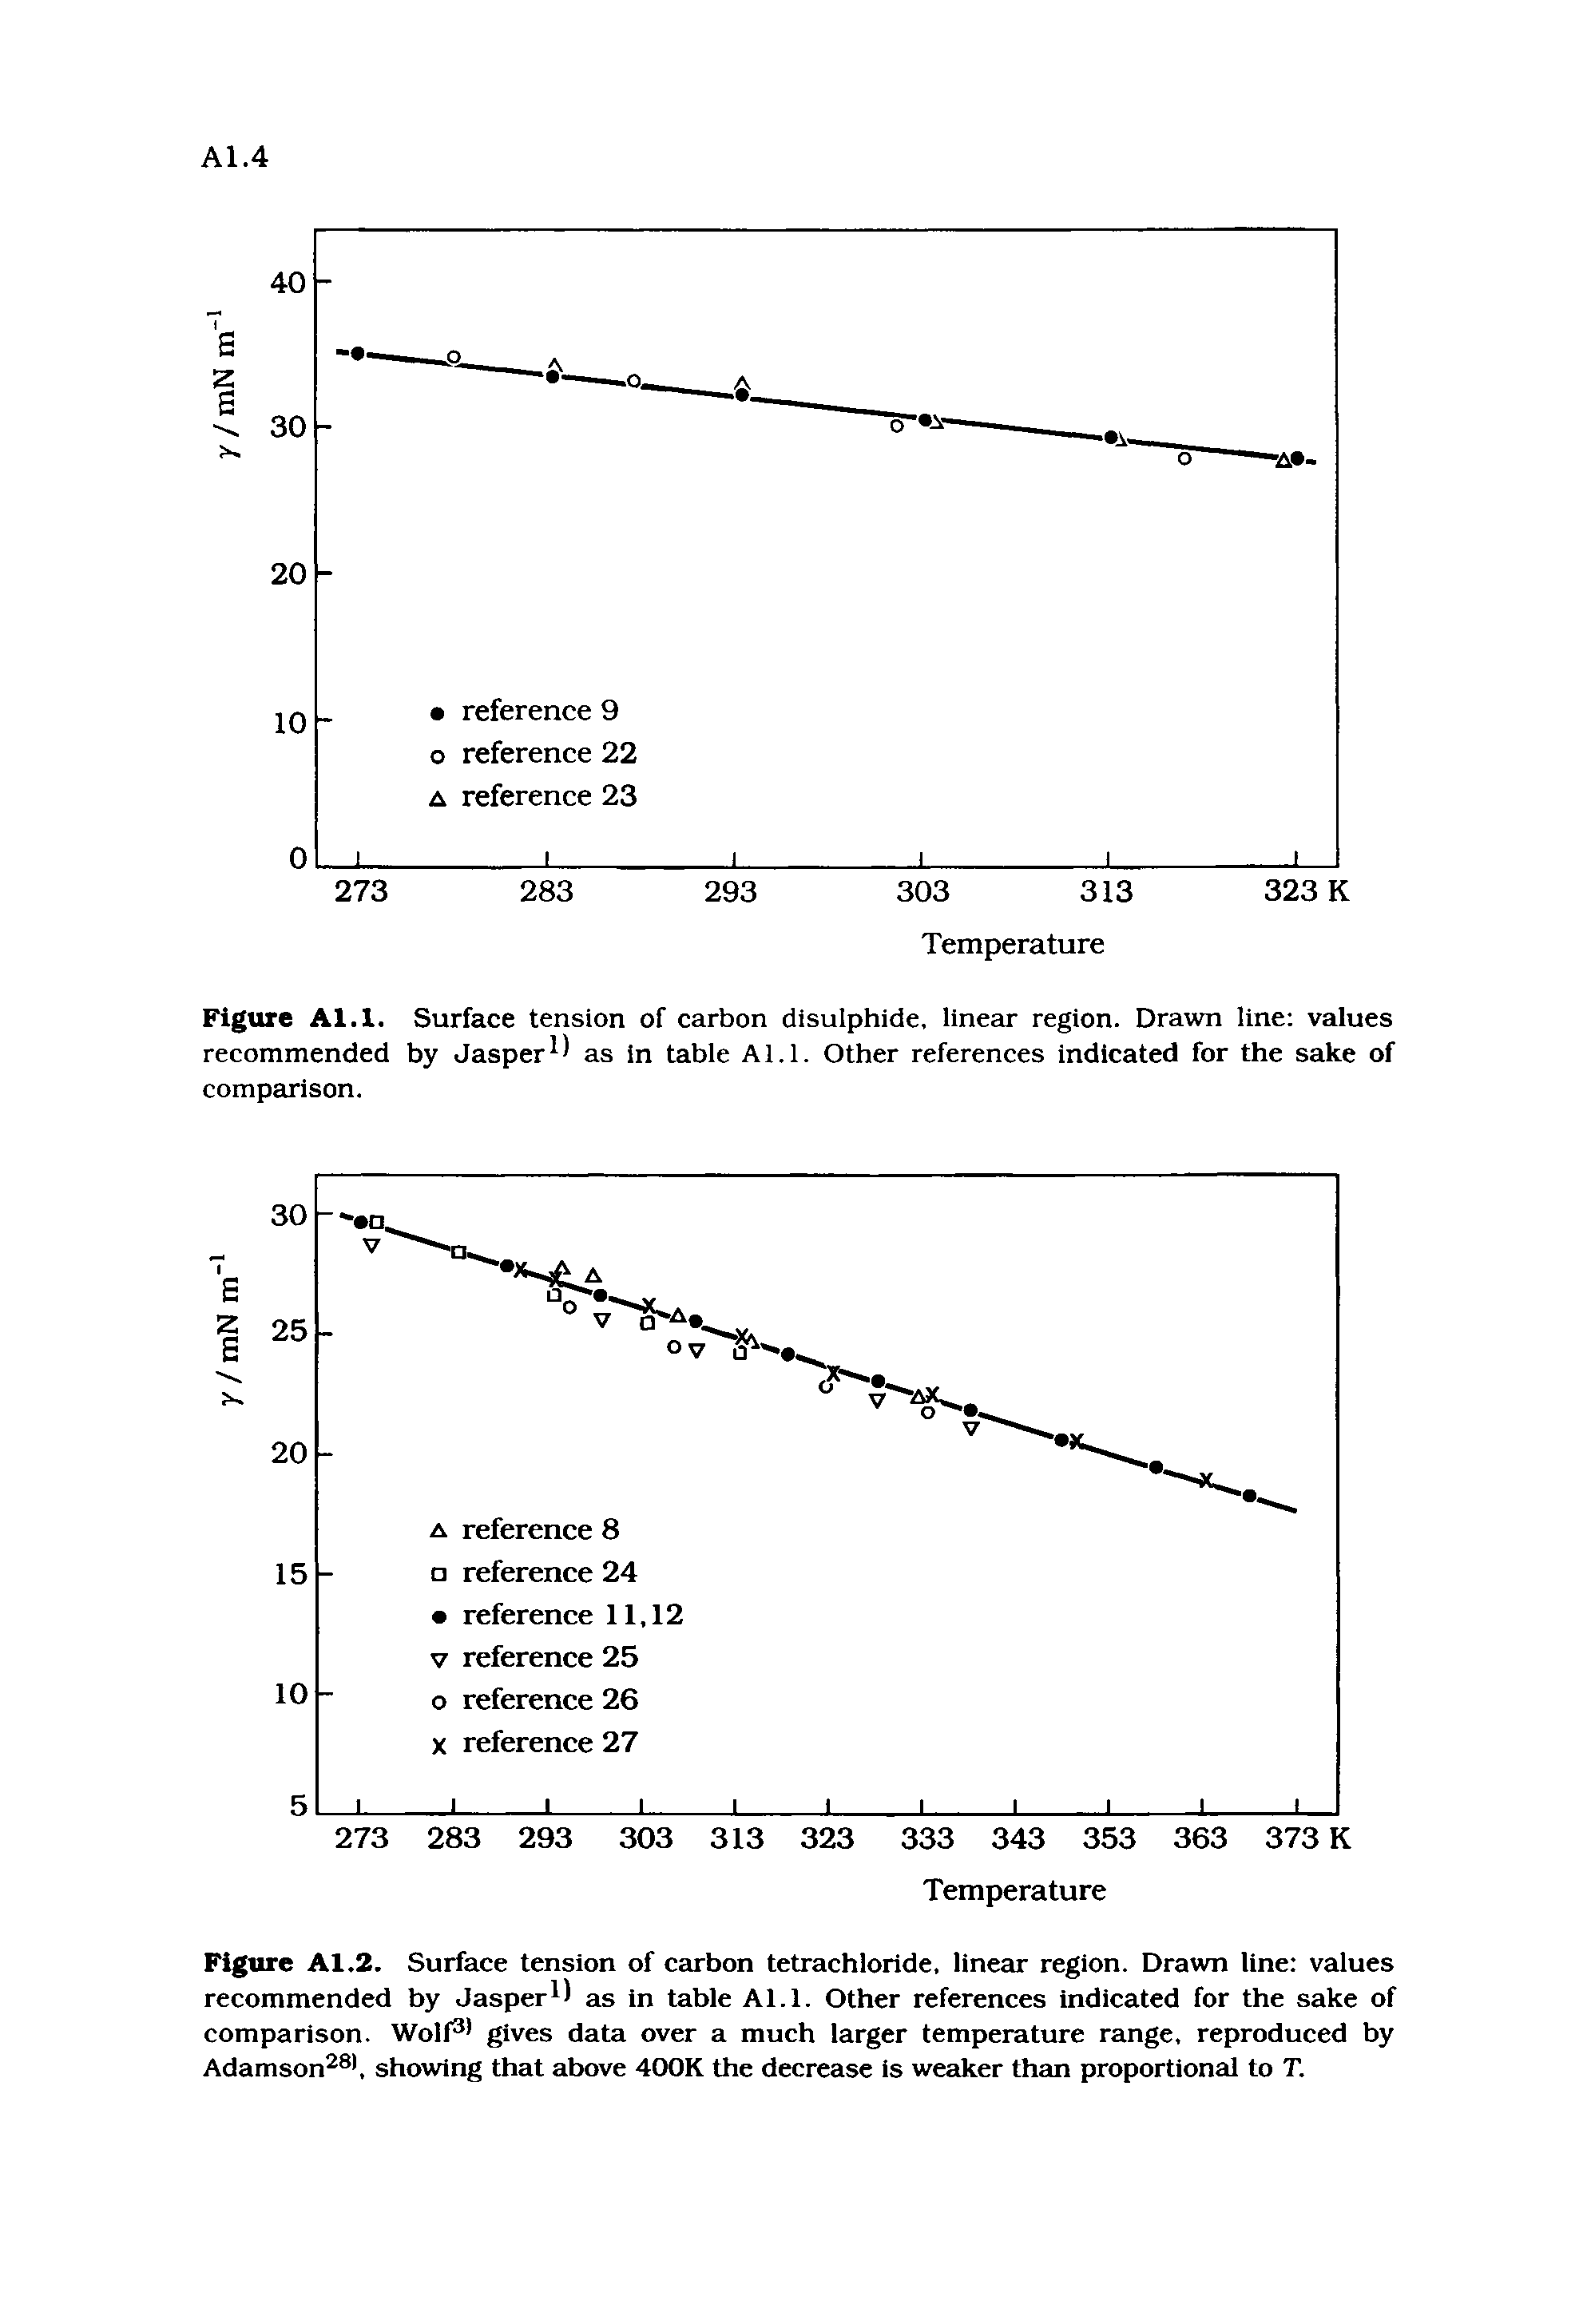 Figure Al.l. Surface tension of carbon disulphide, linear region. Drawn line values recommended by Jasper ) as in table Al.l. Other references indicated for the sake of comparison.